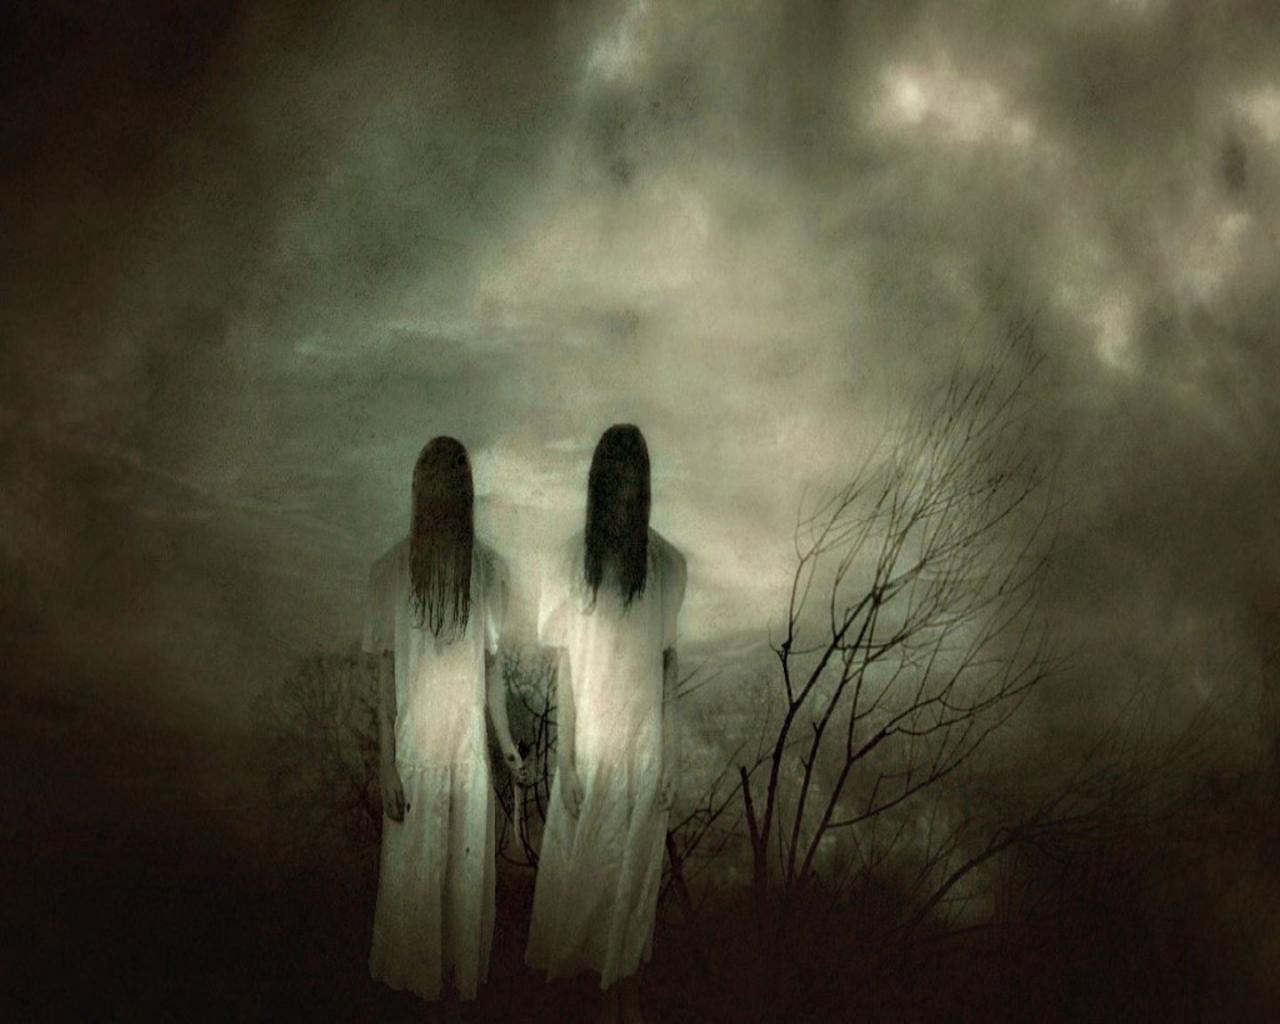  Ghosts wallpaper Scary Images of Real Ghosts hd wallpaper